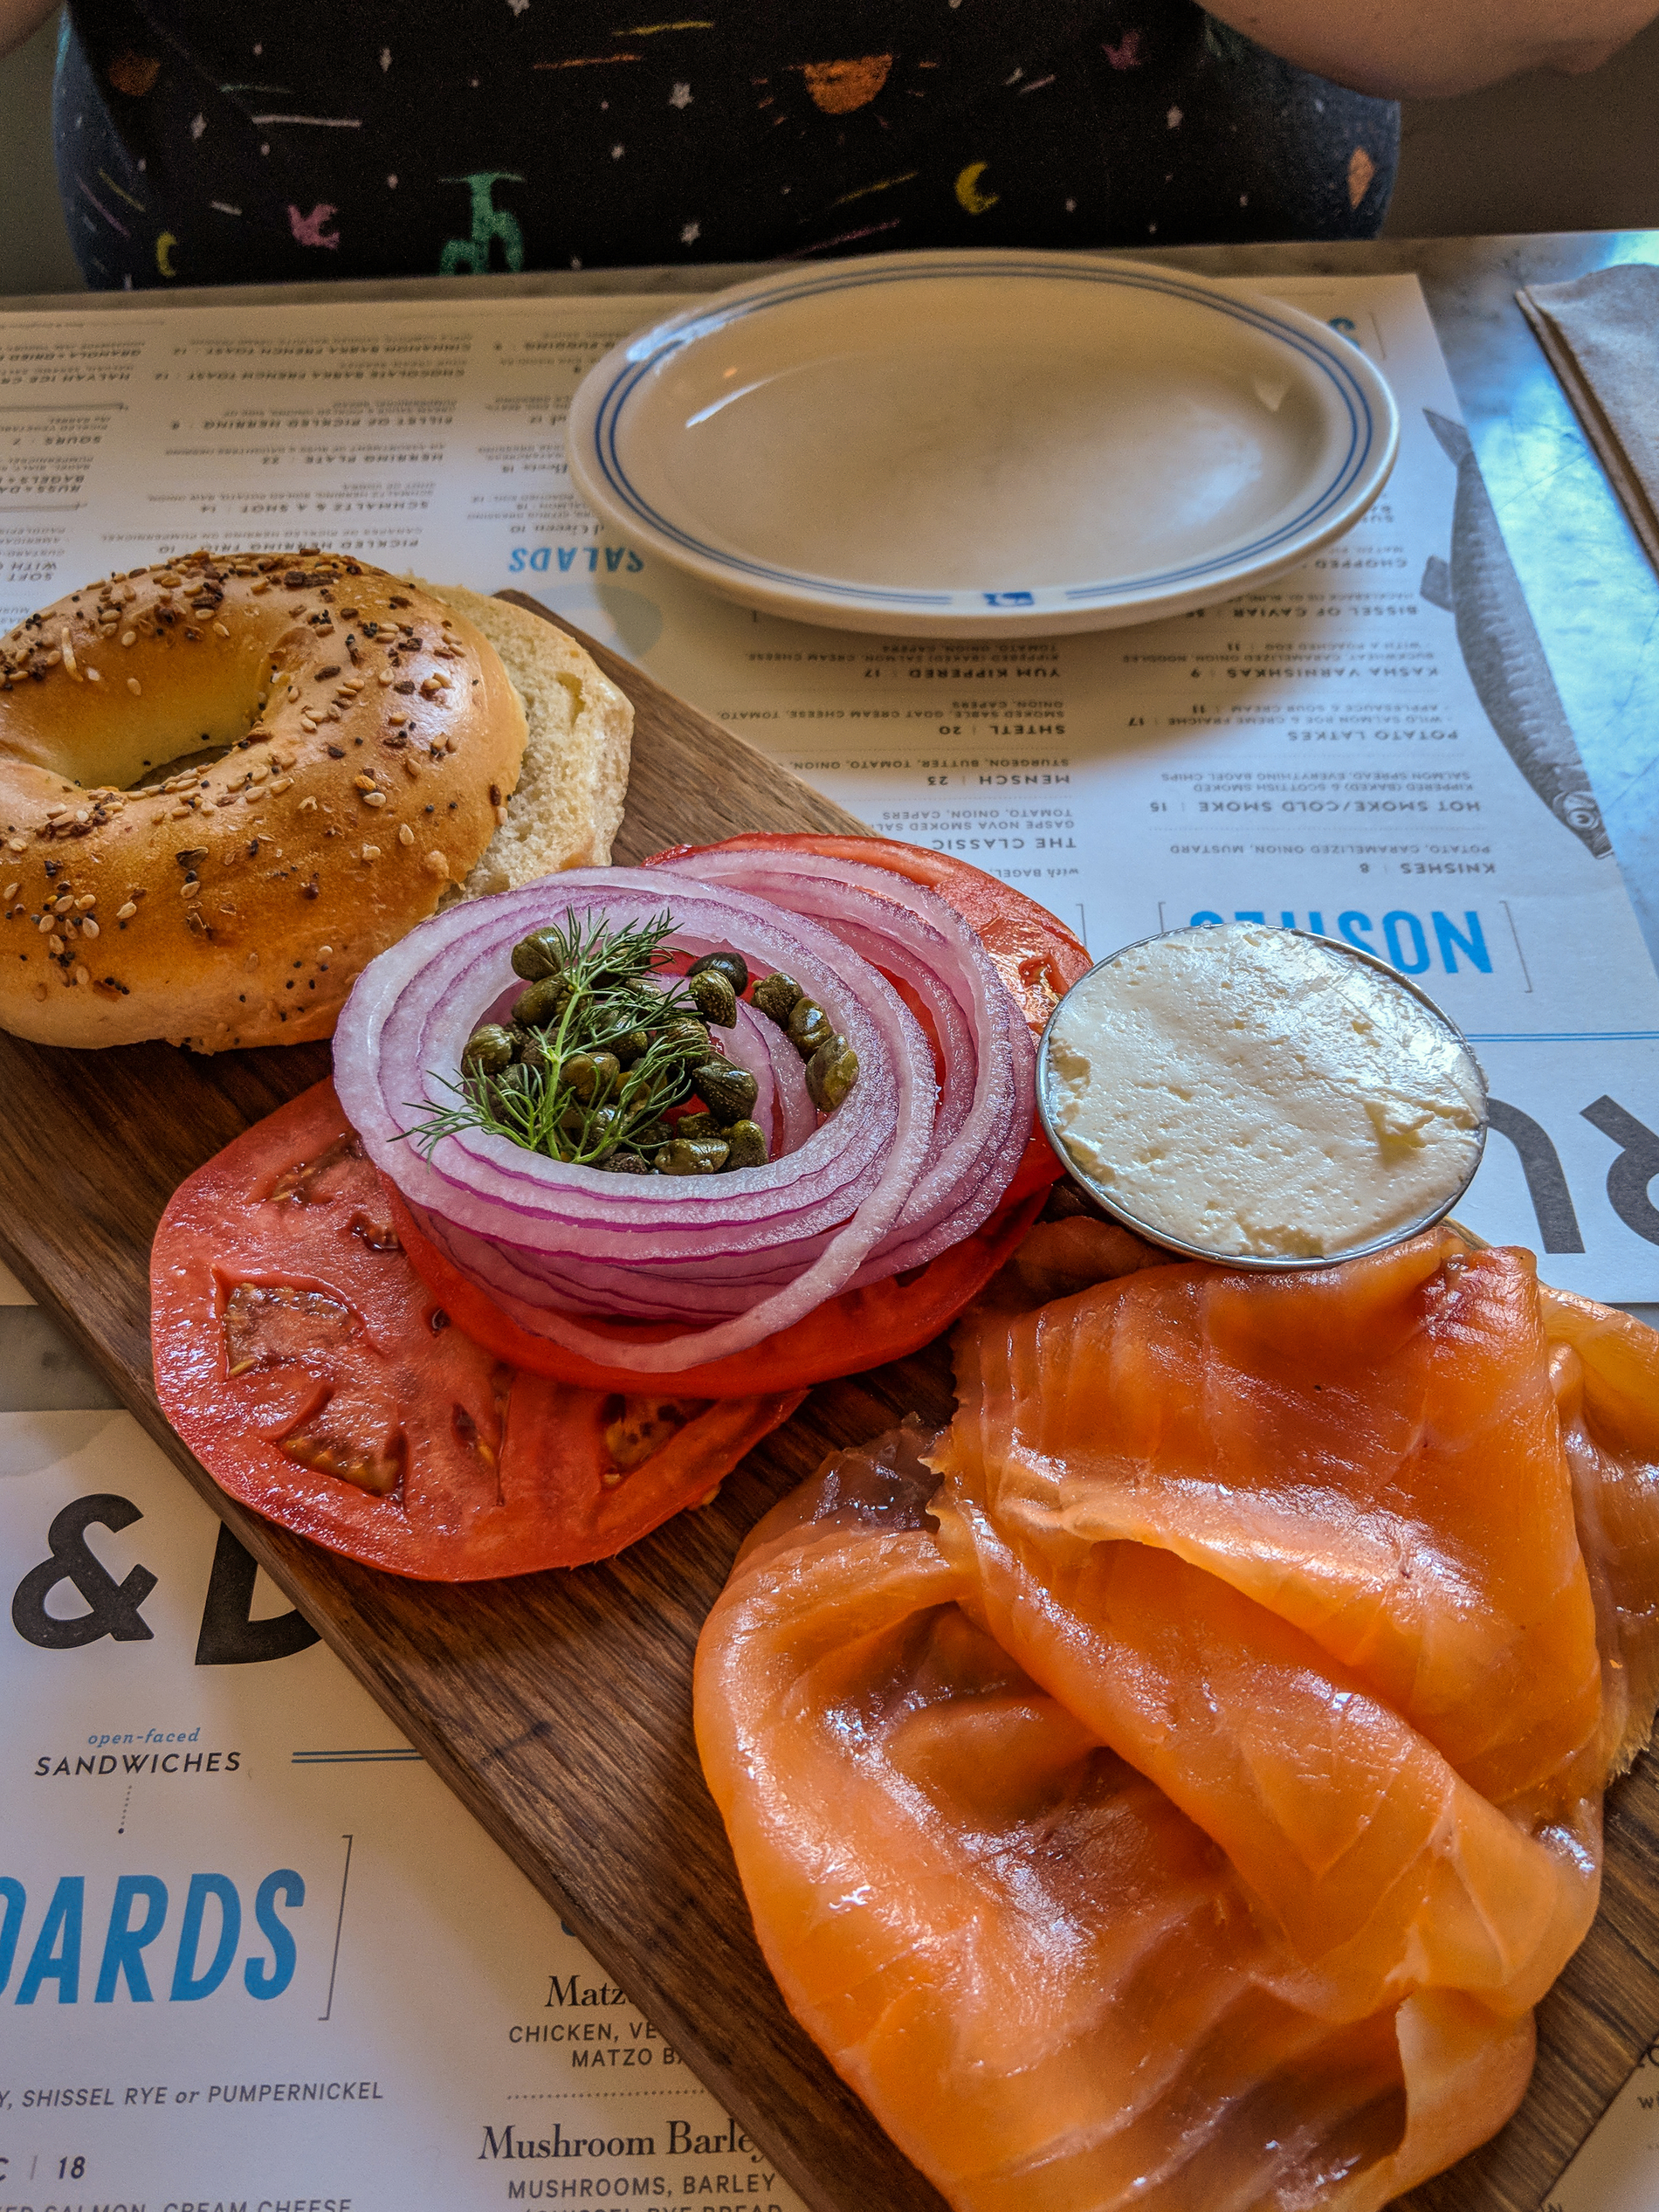 Bagels from Russ & Daughters, New York